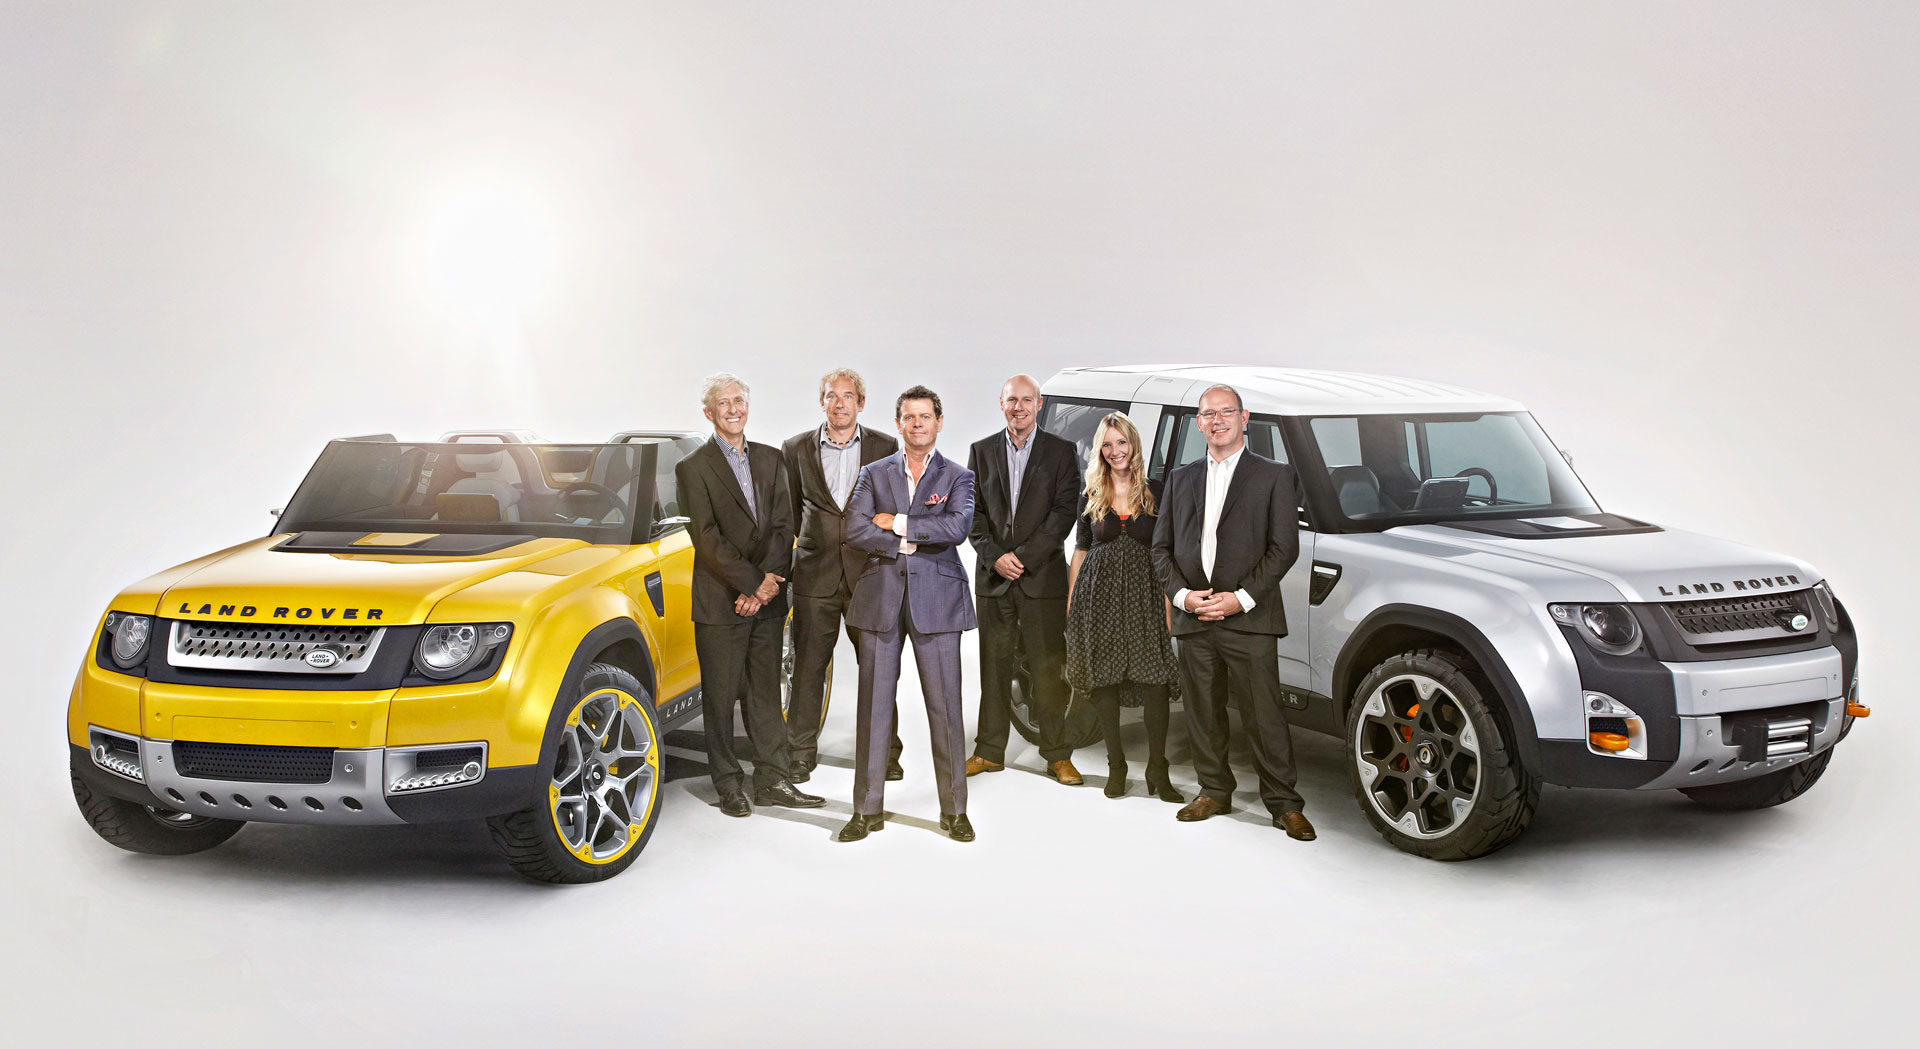 Land Rover DC100 and DC100 Sport Concepts, 2011 - Design Team